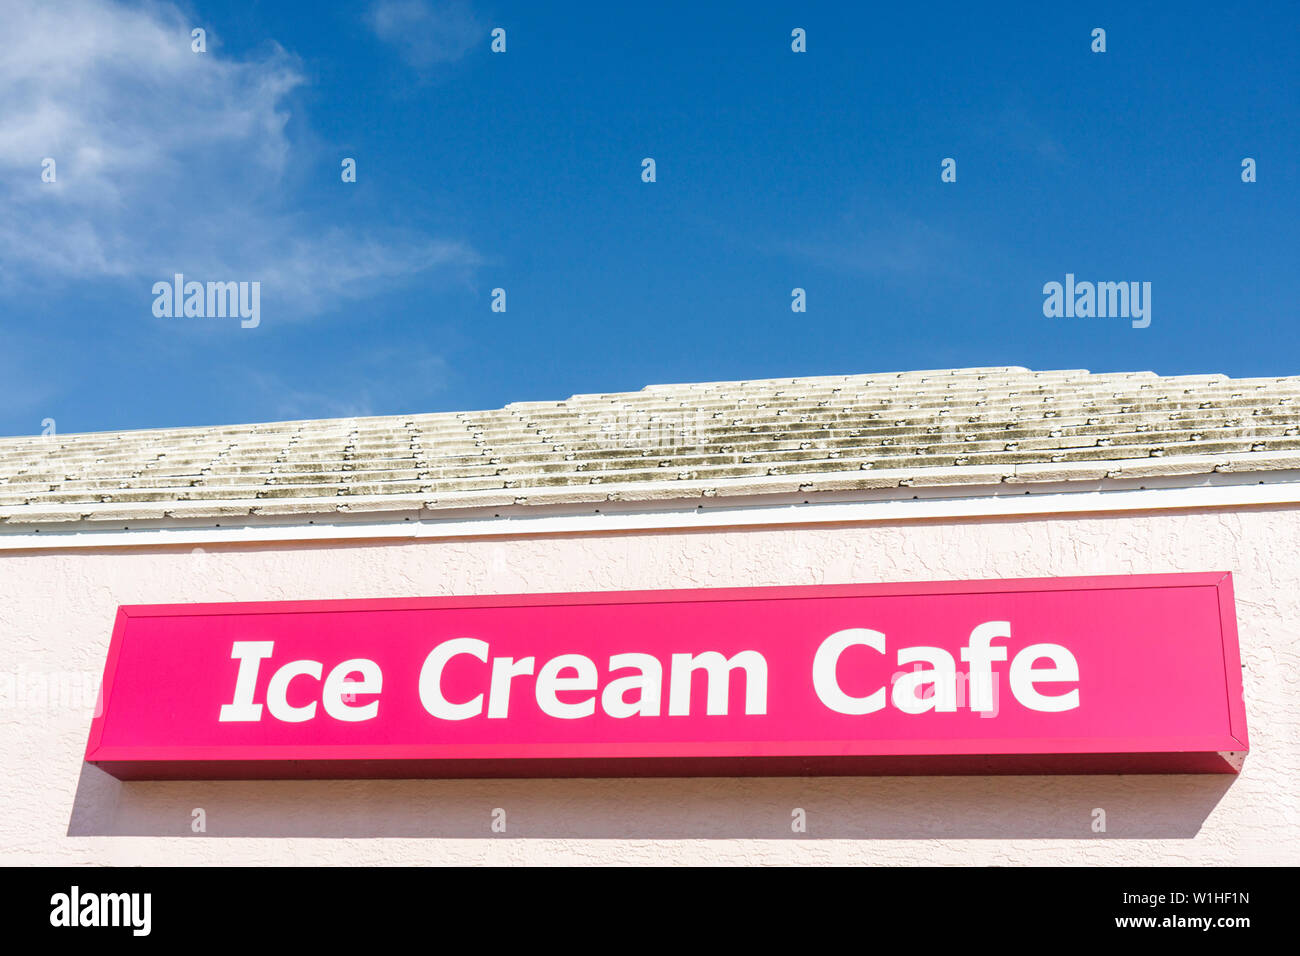 Florida Collier County,Fort Ft. Myers Beach,sign,signs,Ice Cream cafe,shop,outside exterior,front,entrance,FL091018042 Stock Photo